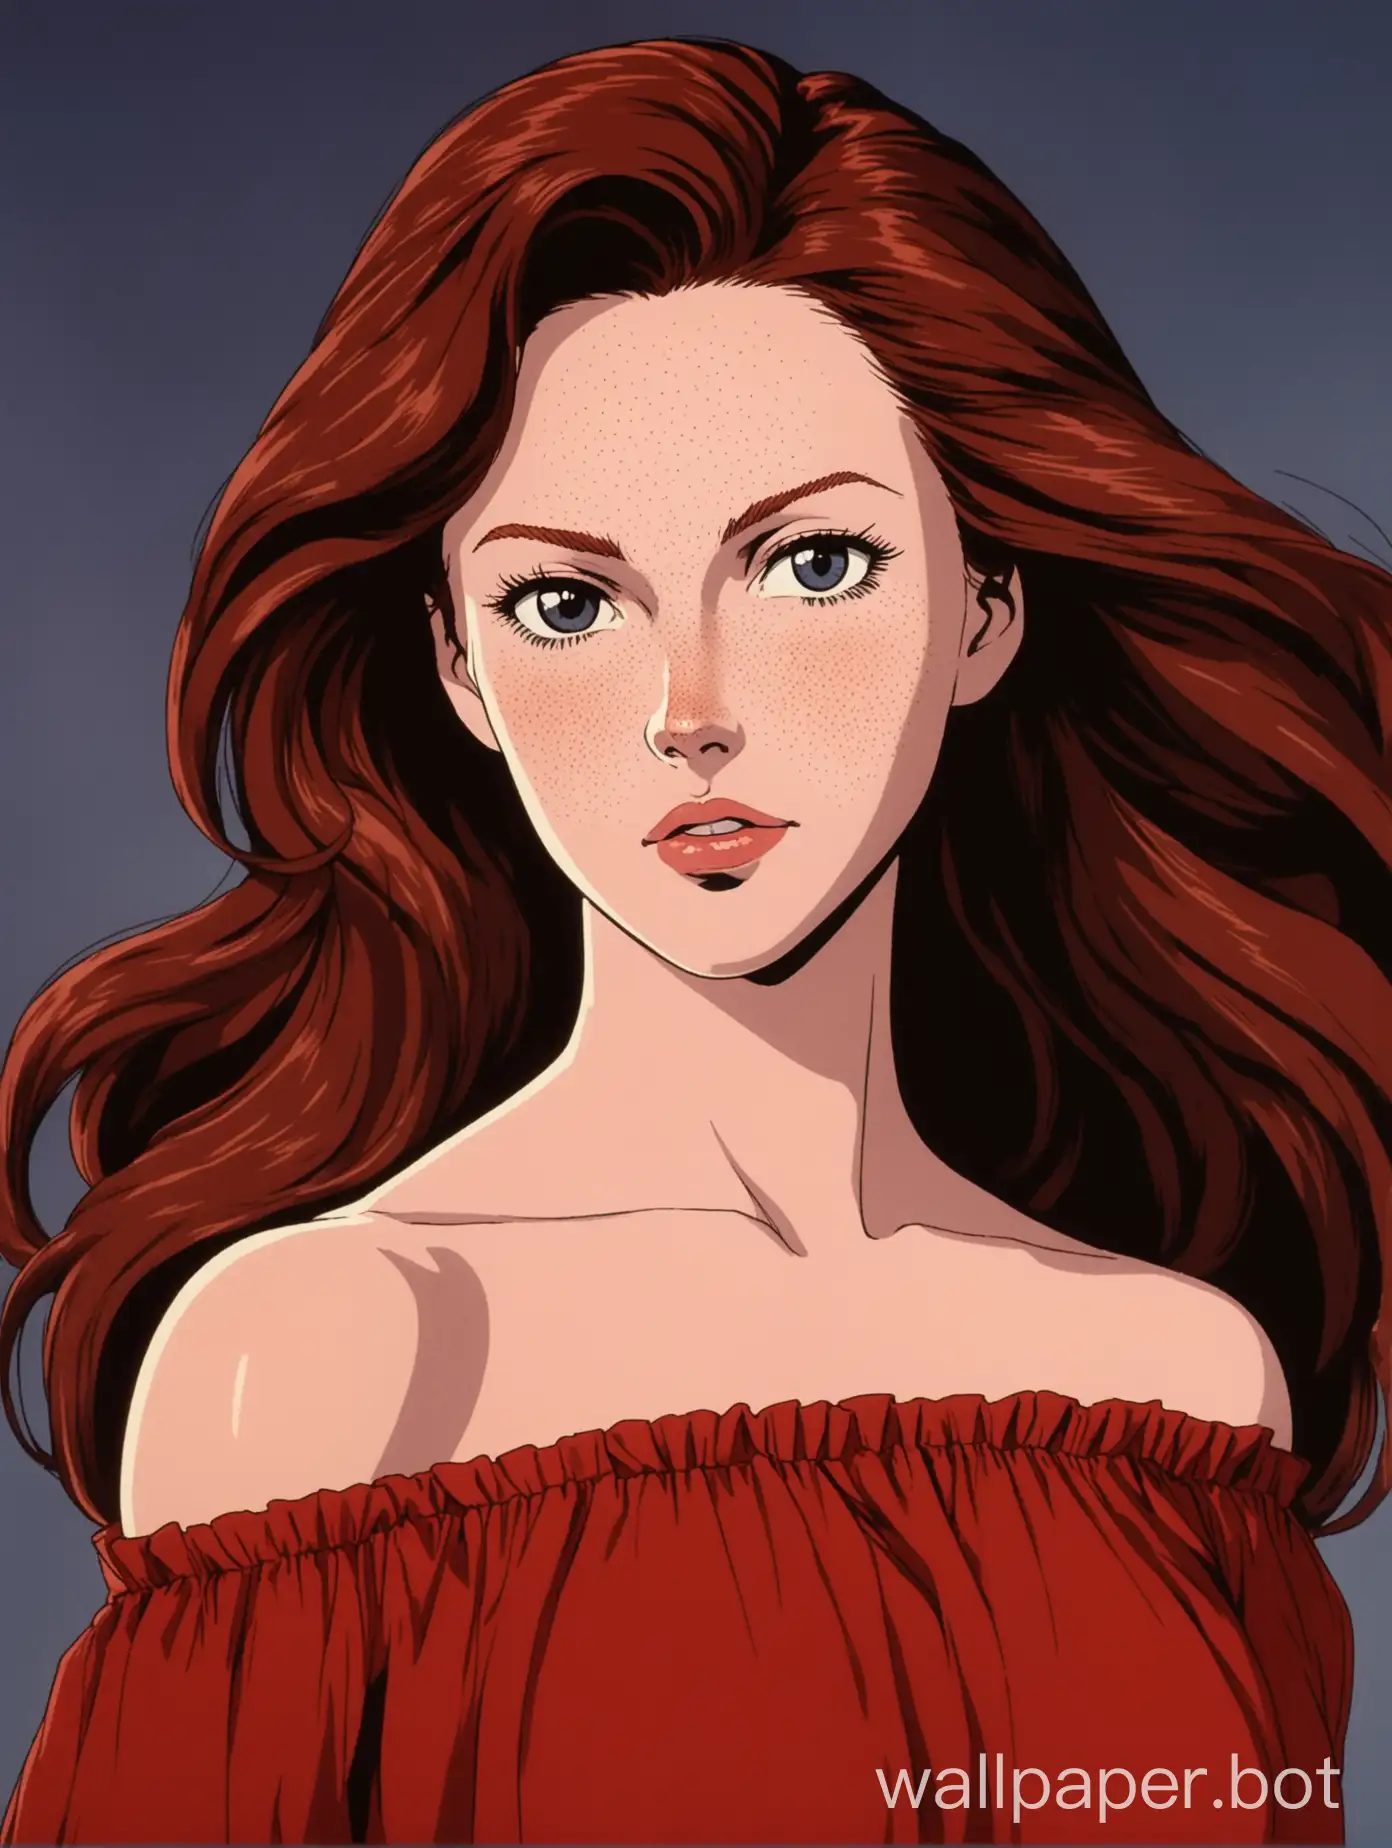 Portrait of an attractive 30-year-old woman with long dark red hair, thin and sharp features, pale and Swedish, seductive and youthful, freckles, wearing a sheer red off-the-shoulder dress, she looks like Rebecca Ferguson, 1980s retro anime